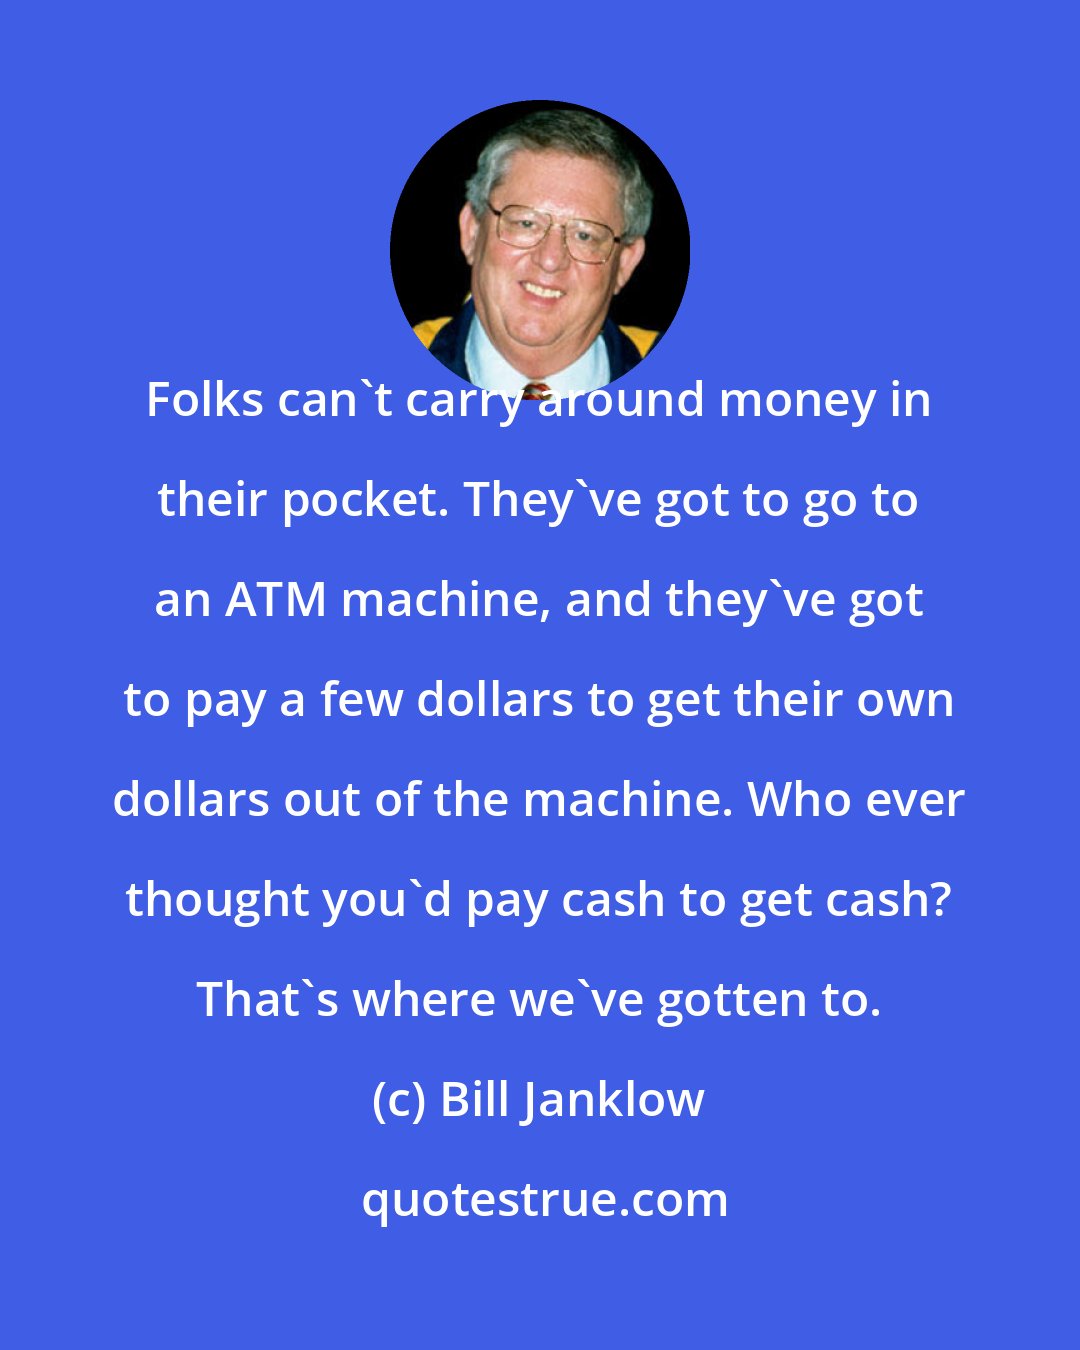 Bill Janklow: Folks can't carry around money in their pocket. They've got to go to an ATM machine, and they've got to pay a few dollars to get their own dollars out of the machine. Who ever thought you'd pay cash to get cash? That's where we've gotten to.